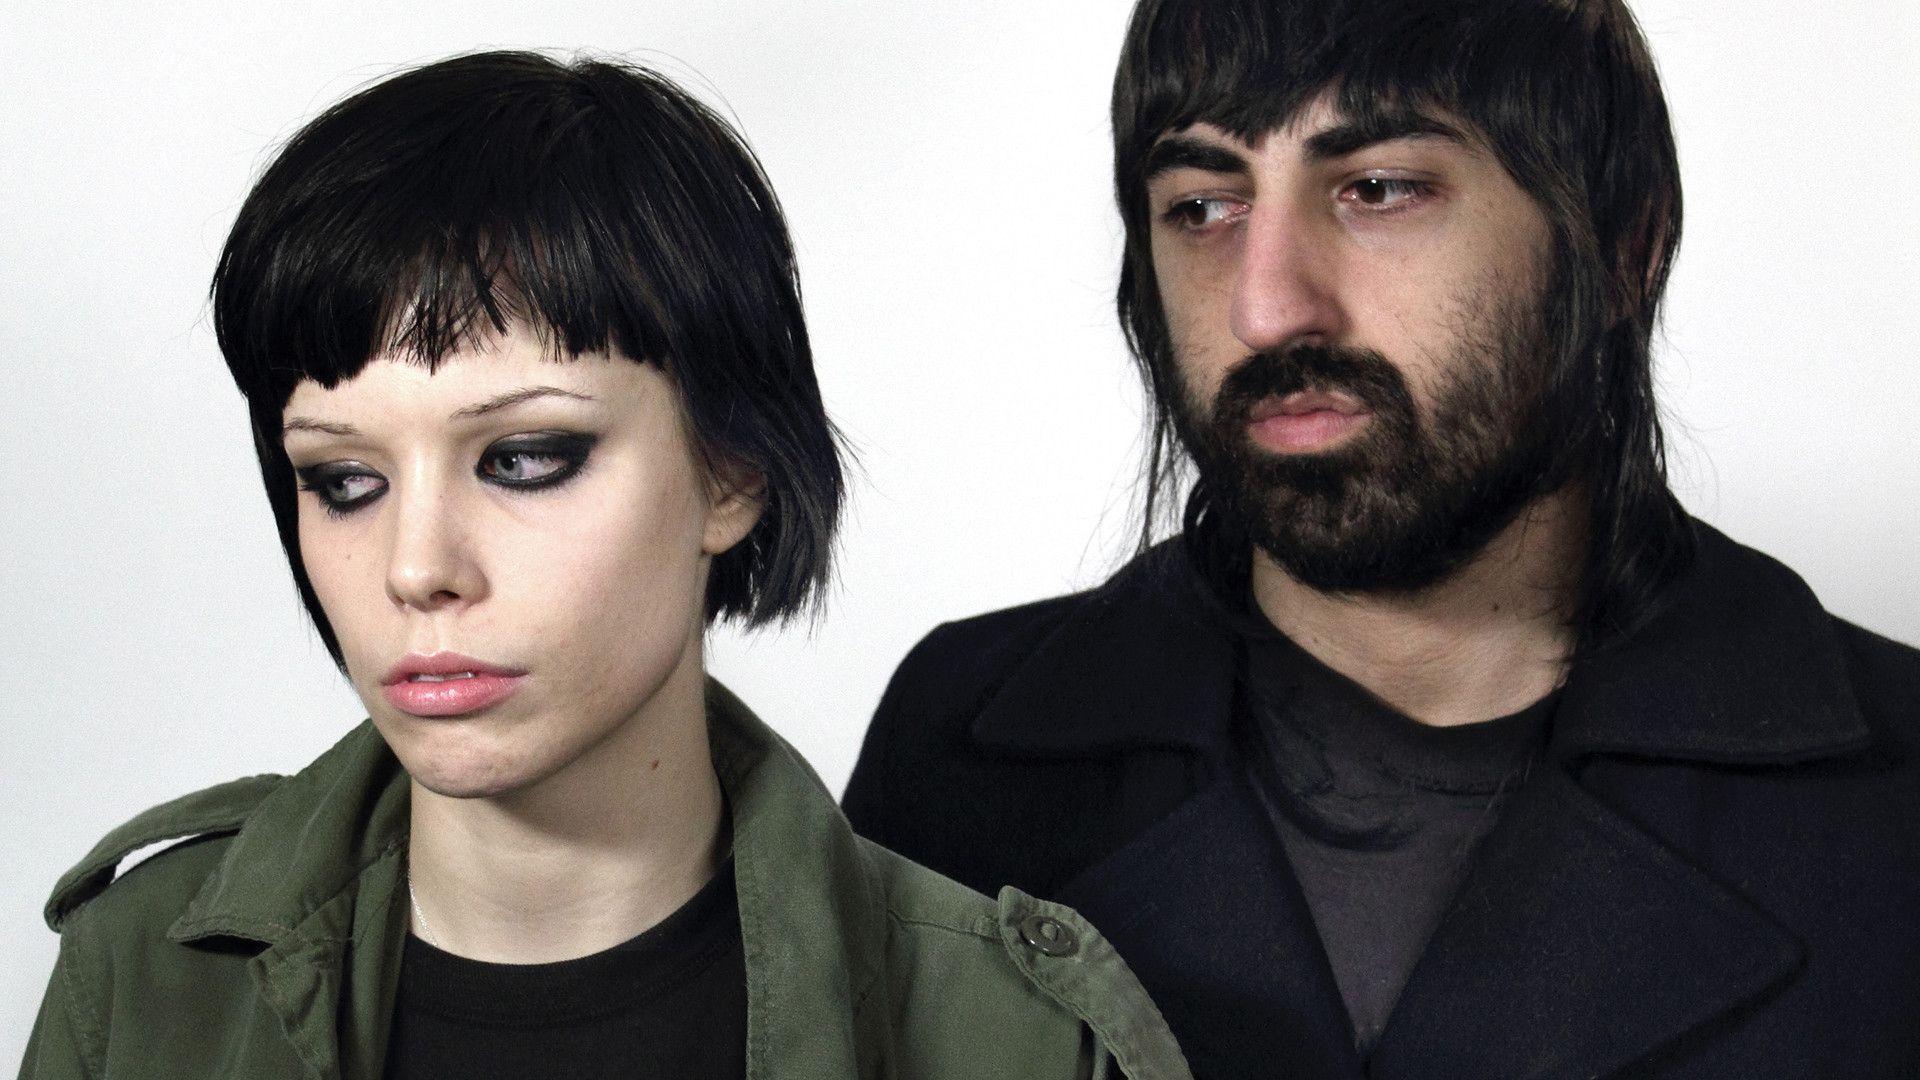 Weekly Music News: Crystal Castles, The Smiths, and more